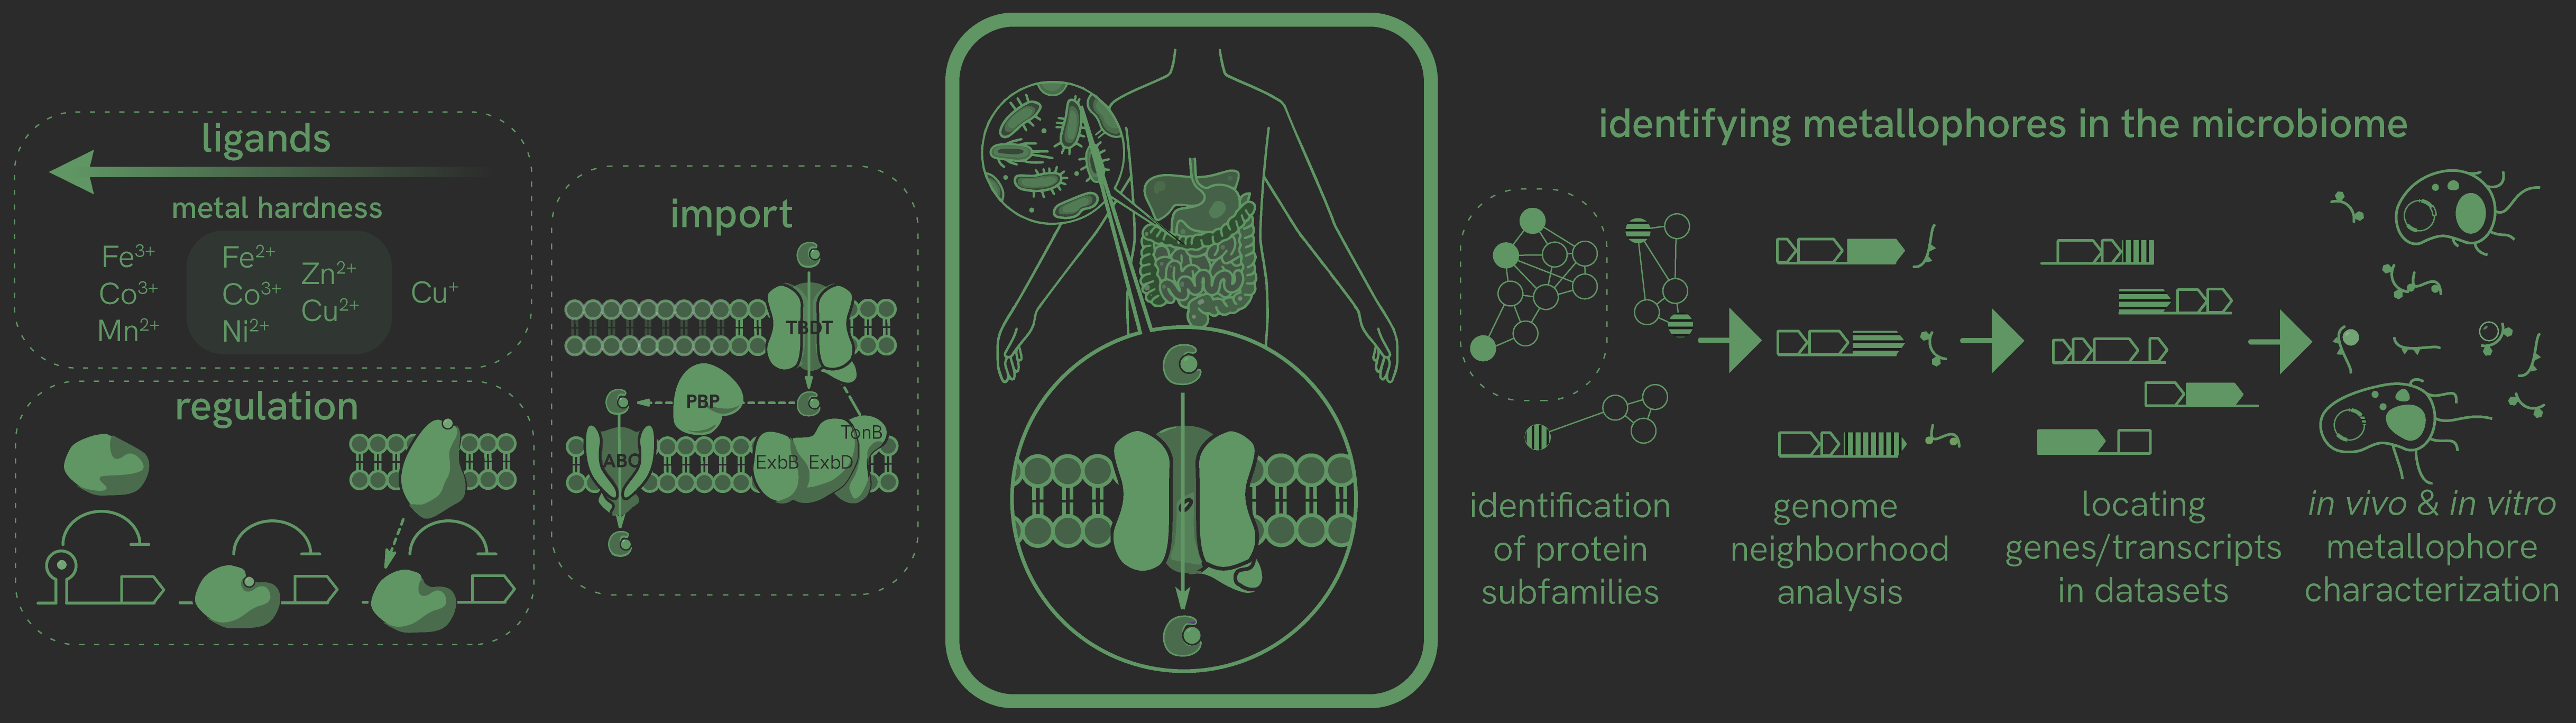 a multipart image illustrating proposed research related to metal uptake in the human gut microbiome. highlighted are 3 classes of proteins related to metal binding natural products, and a schematic for computationally using this information to identify new such compounds in this important but poorly understood environment.